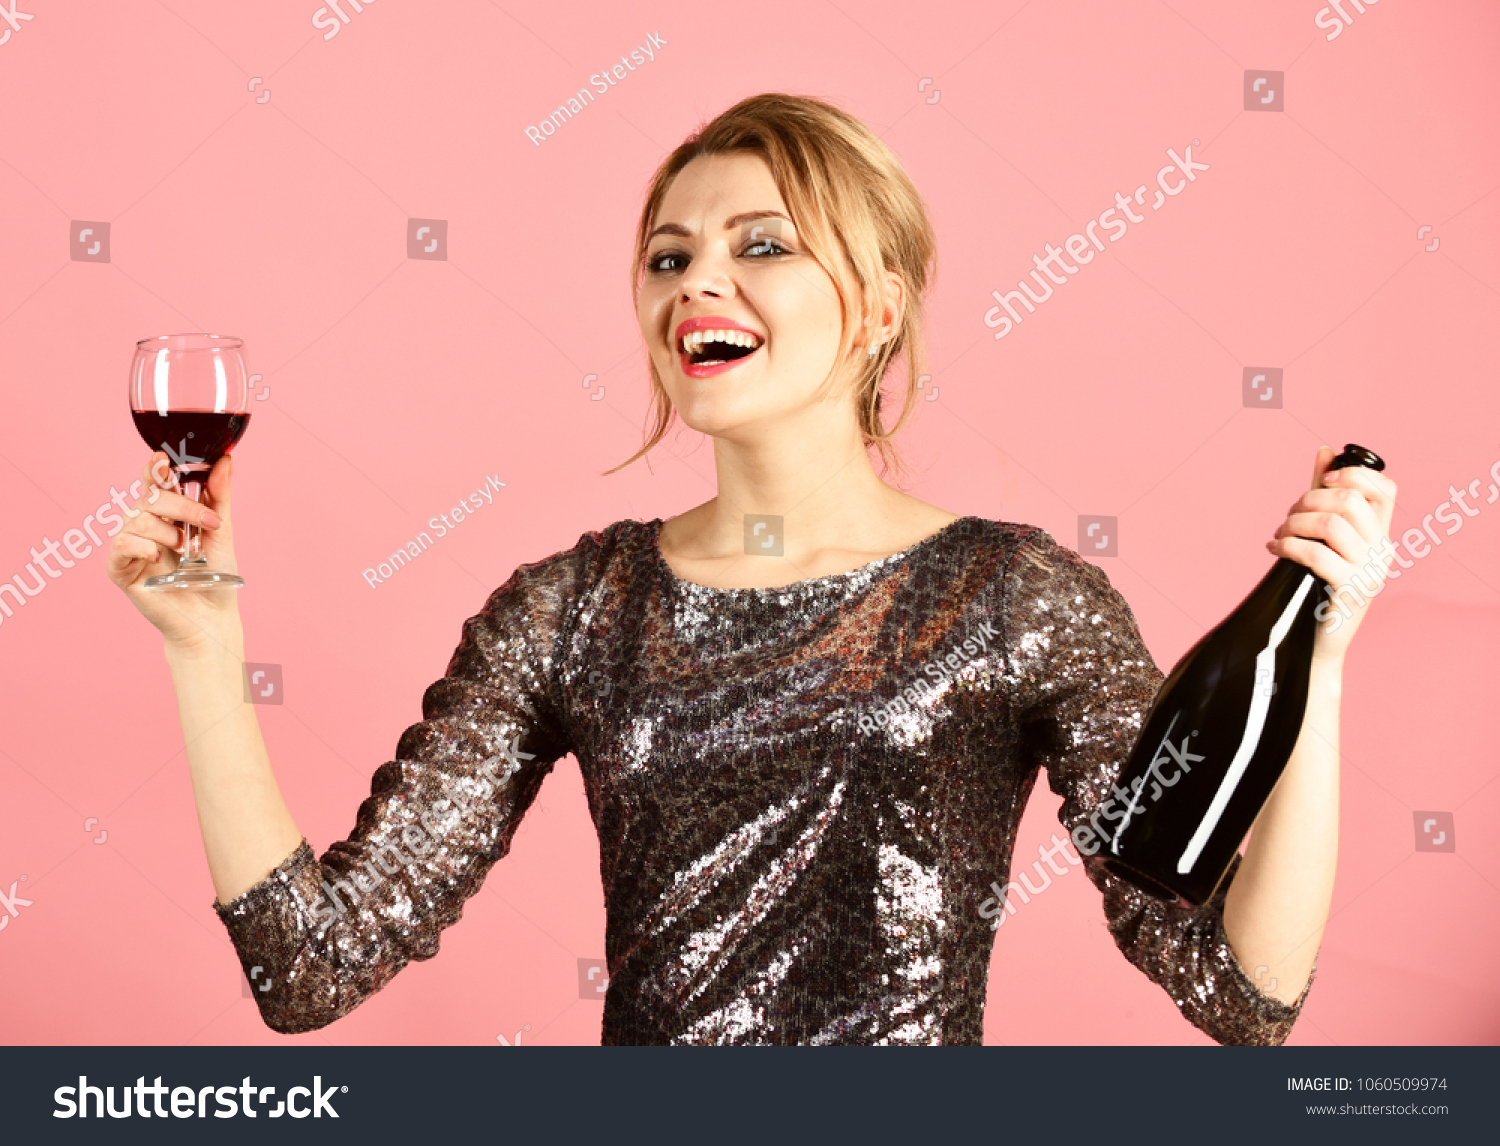 Girl in shining dress with alcohol on pink background. Lady holding glass and bottle of red Italian wine. Winetasting or party concept. Woman with smiling face drinks expensive cabernet or merlot. #1060509974